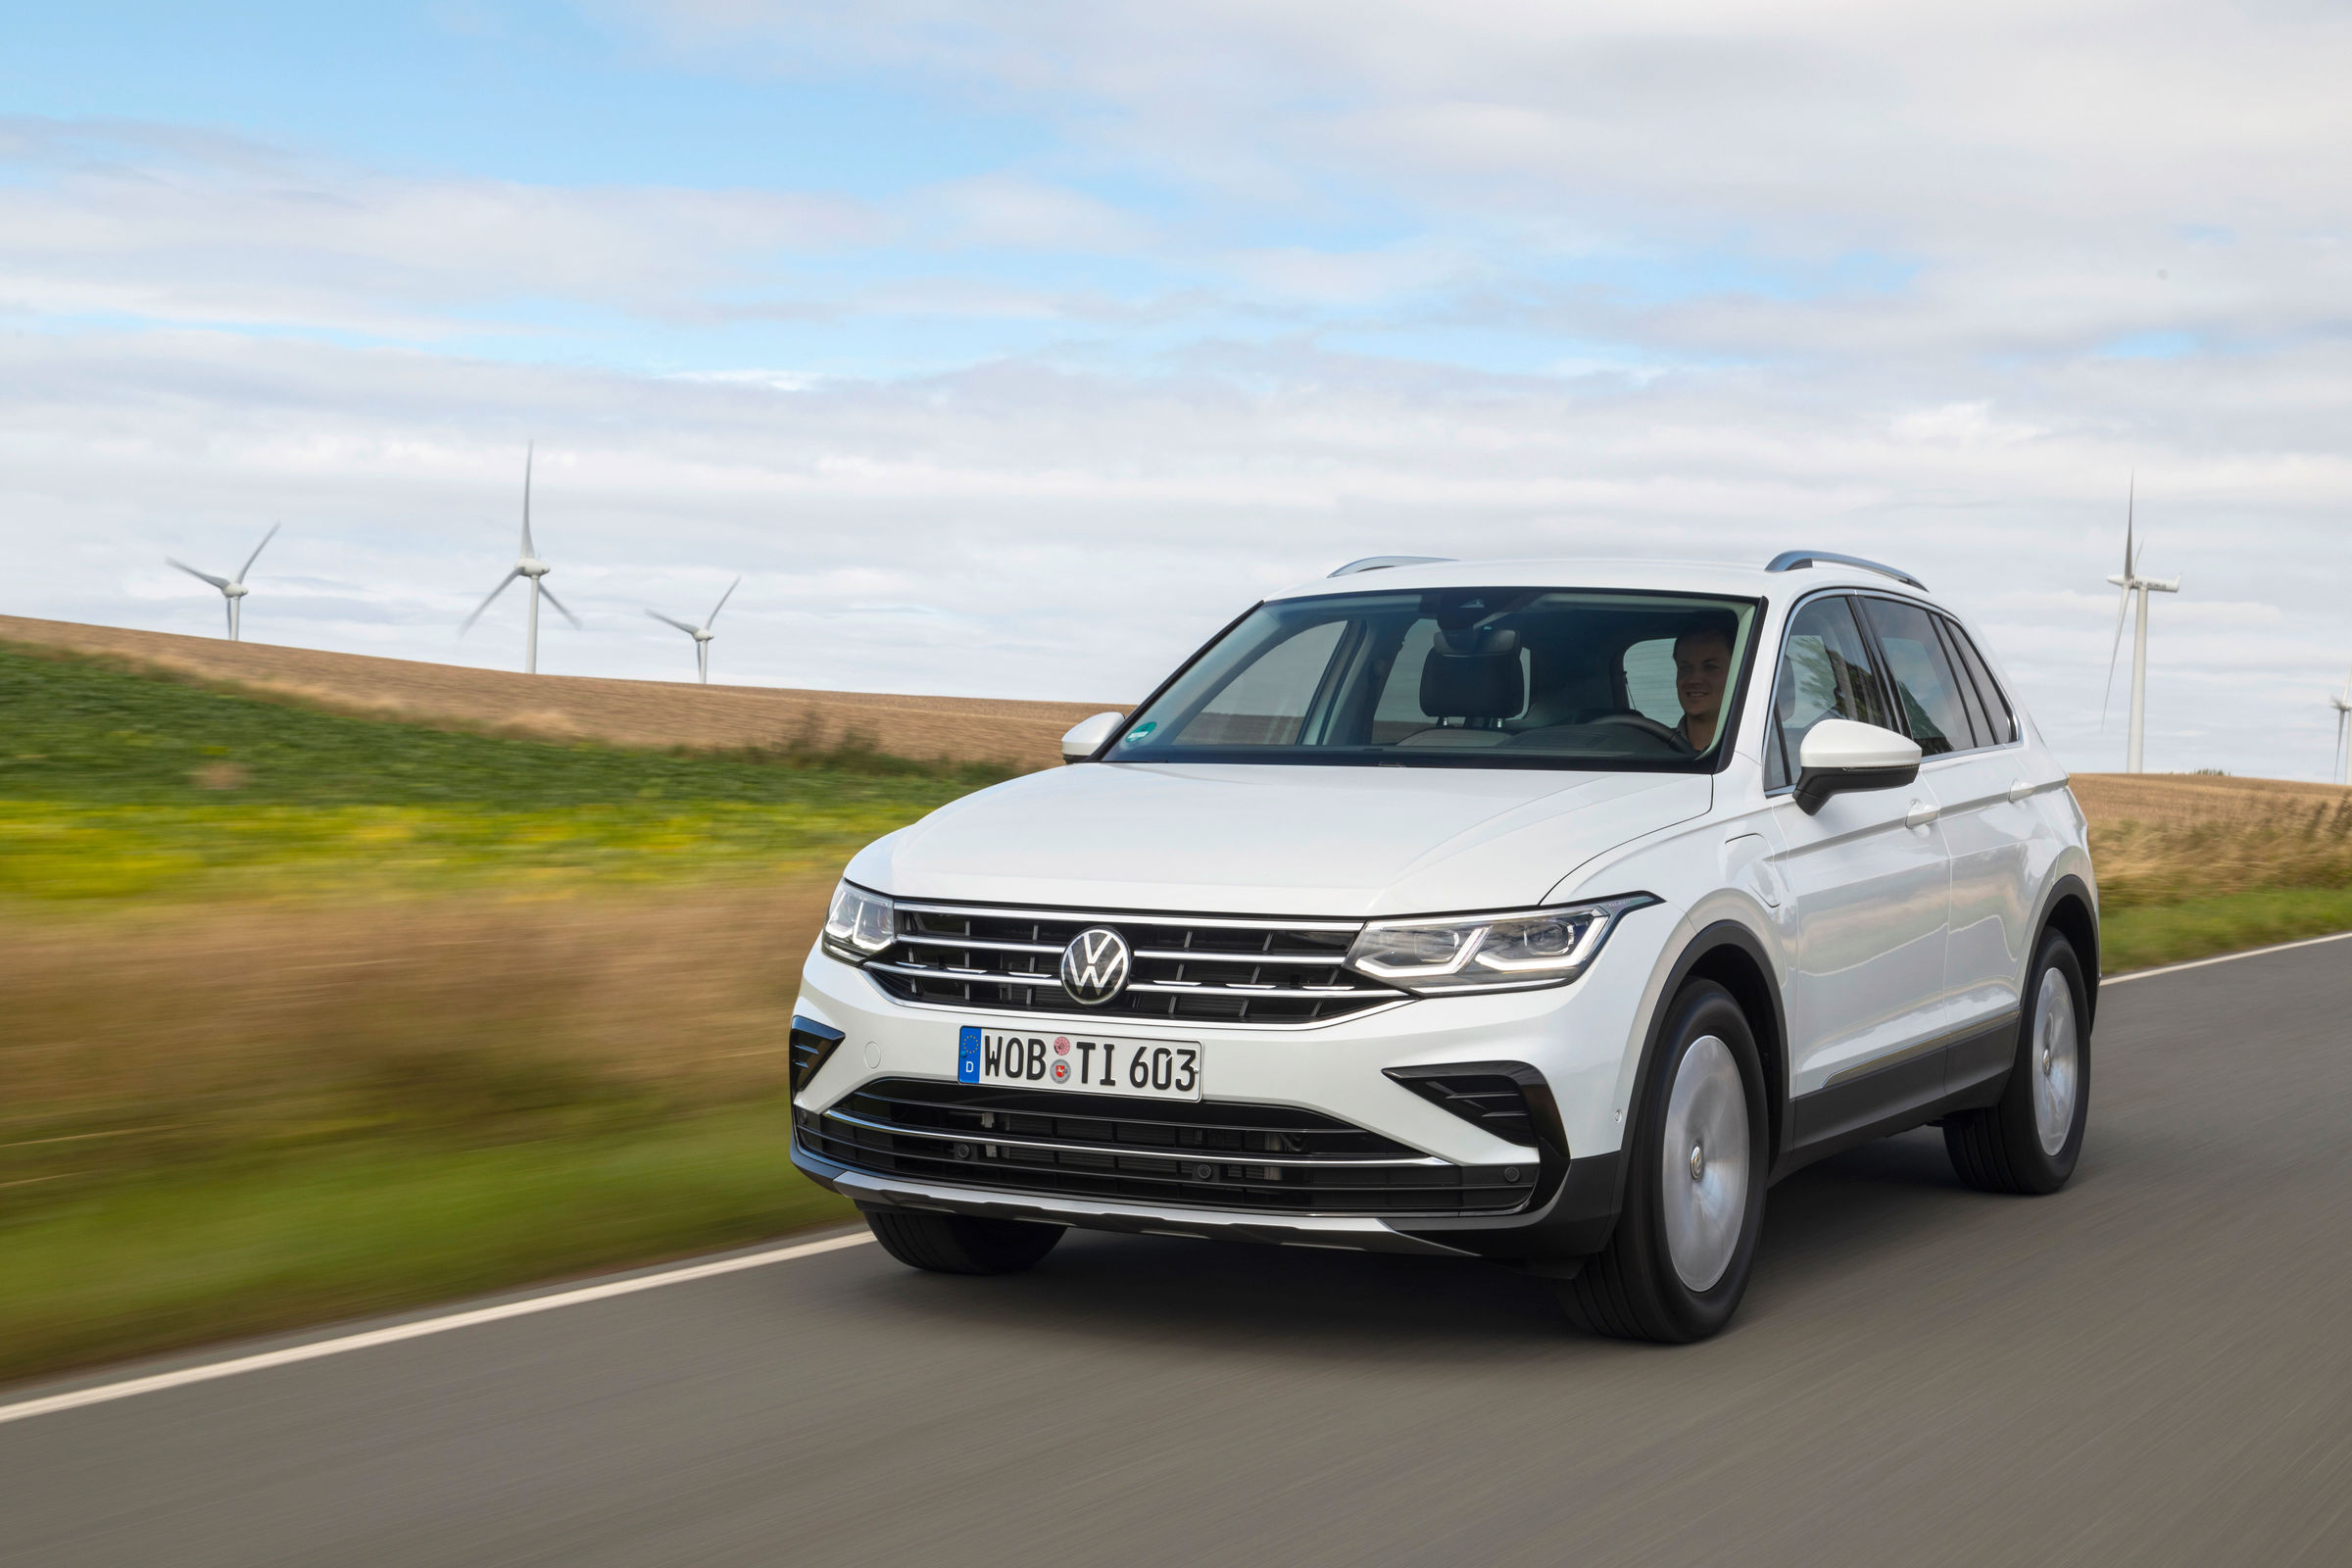 The new plugin hybrid Volkswagen Tiguan goes on sale from £35,515